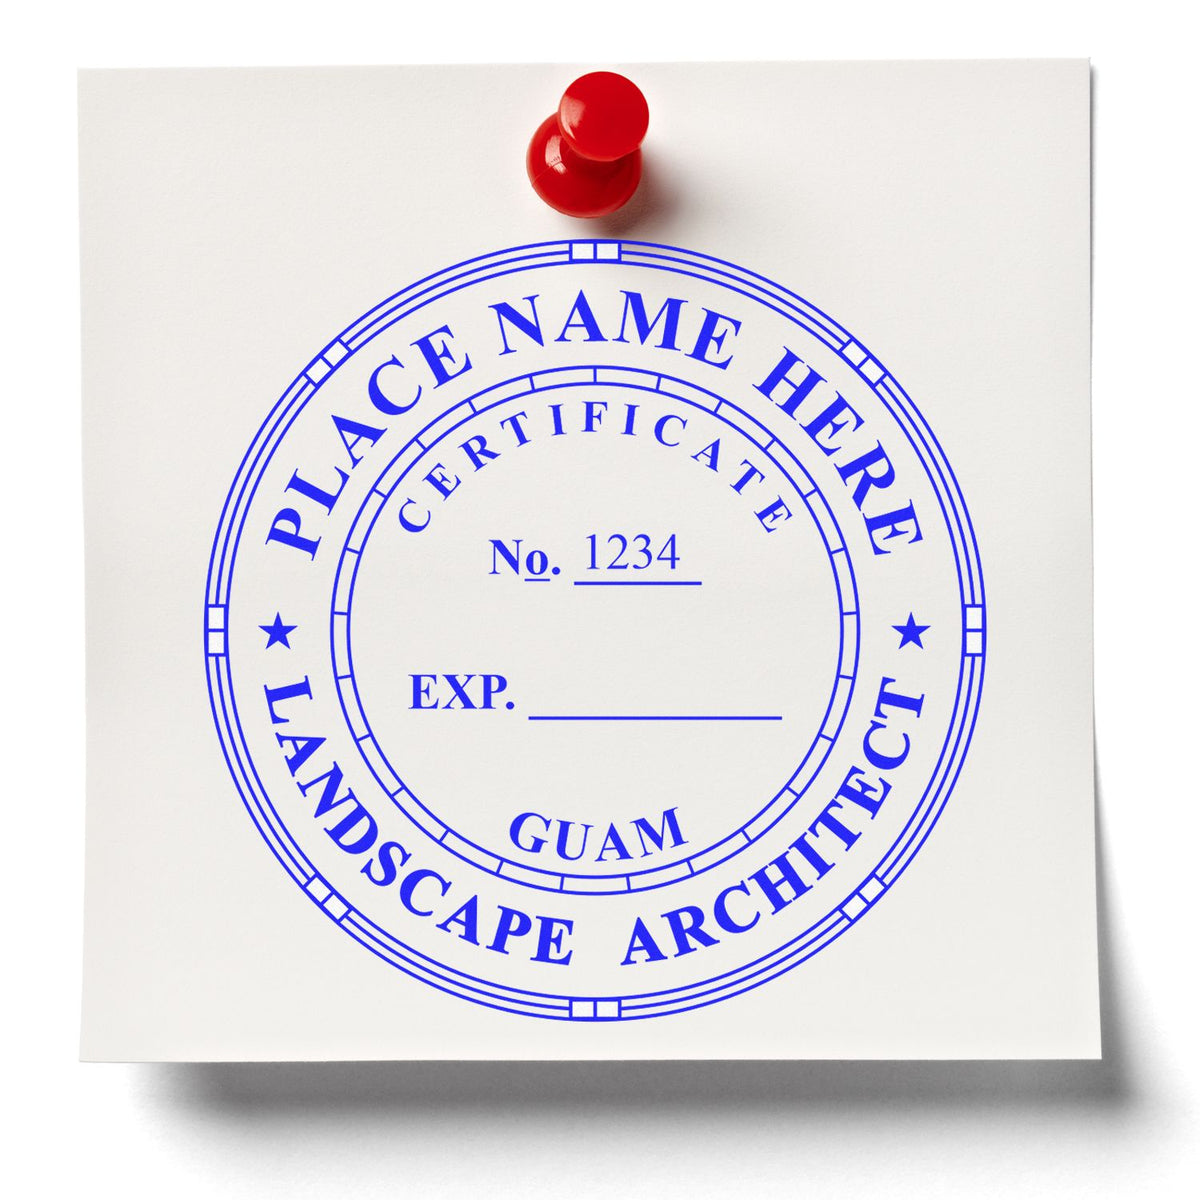 The Slim Pre-Inked Guam Landscape Architect Seal Stamp stamp impression comes to life with a crisp, detailed photo on paper - showcasing true professional quality.